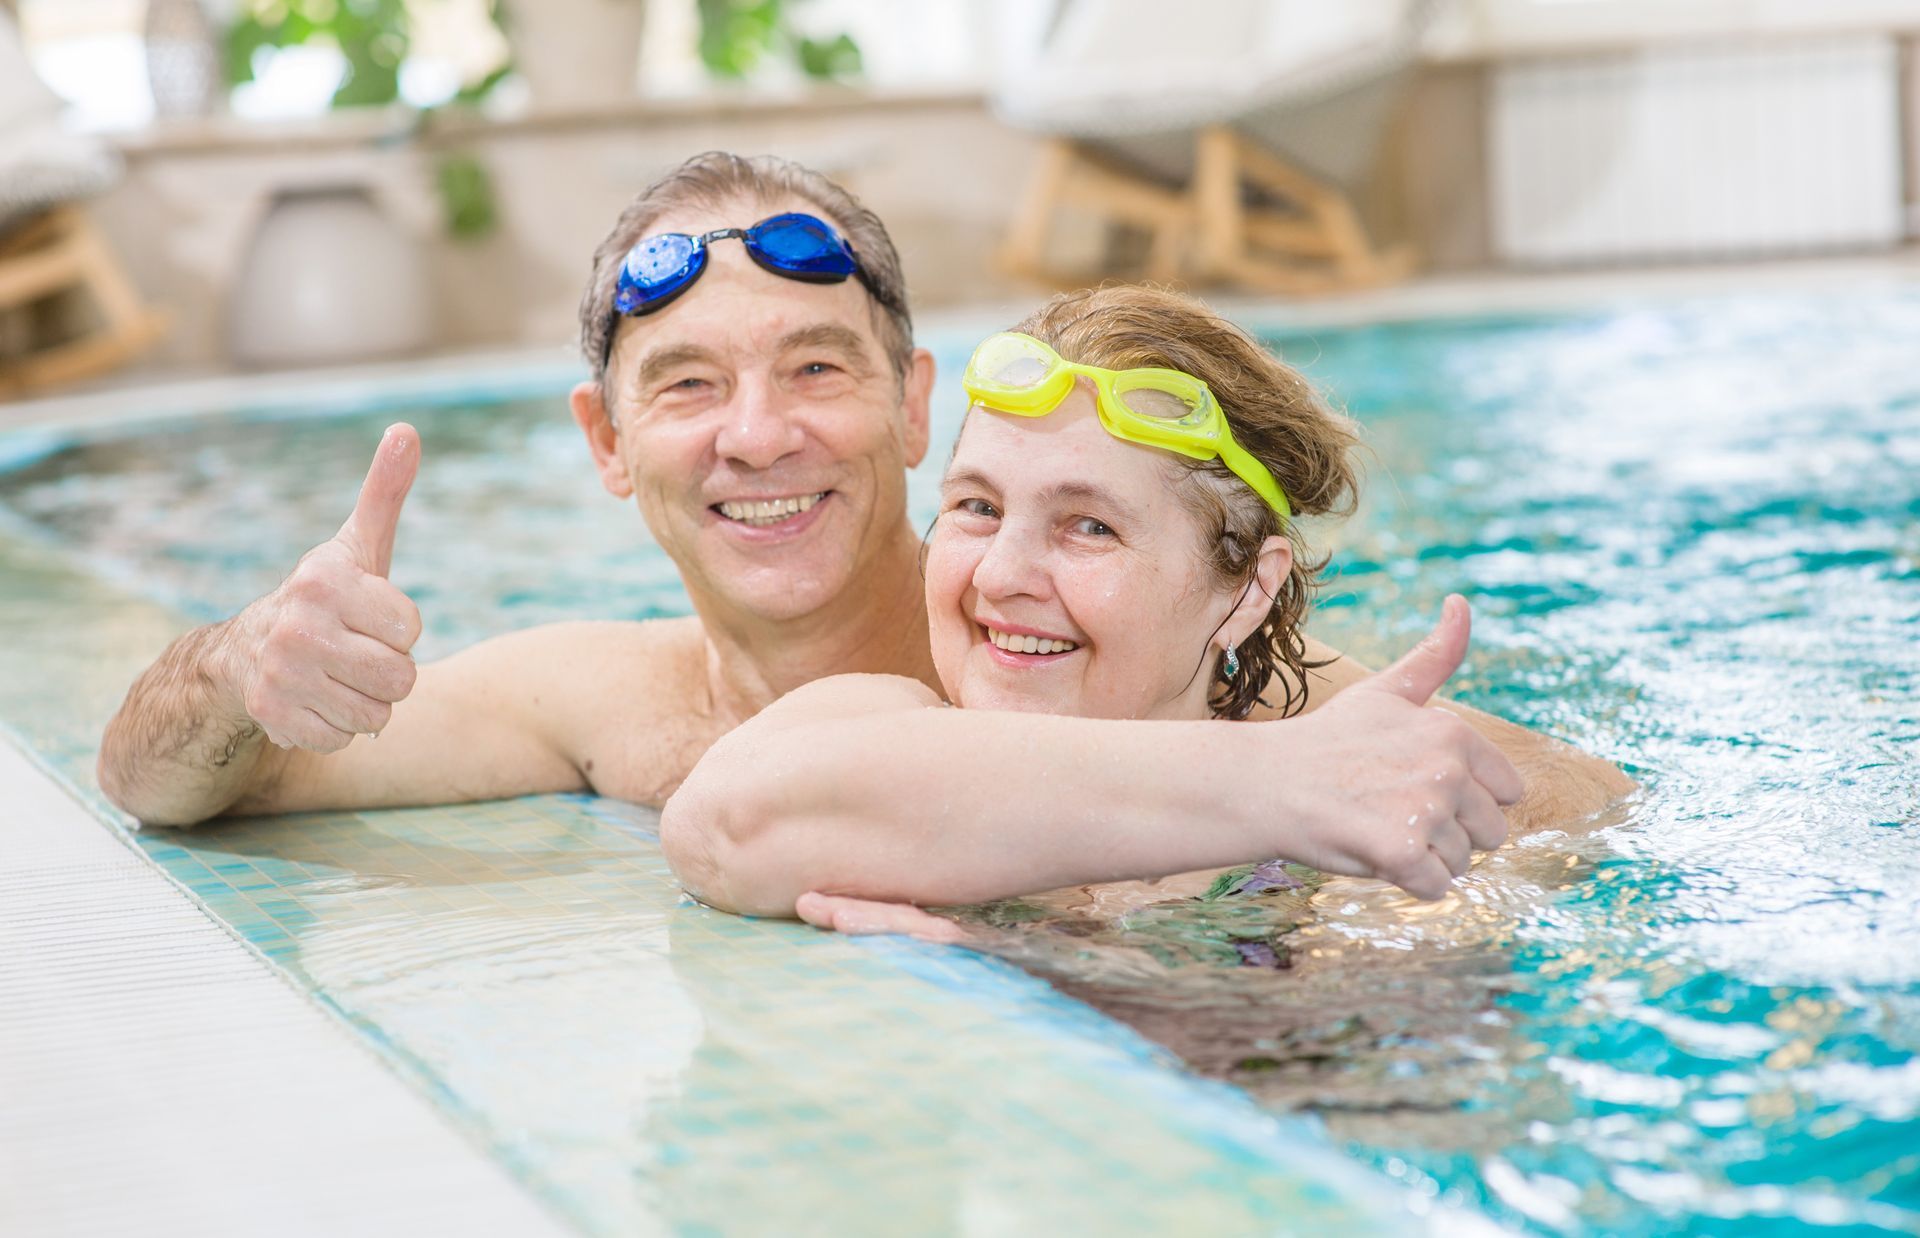 A man and a woman are giving a thumbs up in a swimming pool.